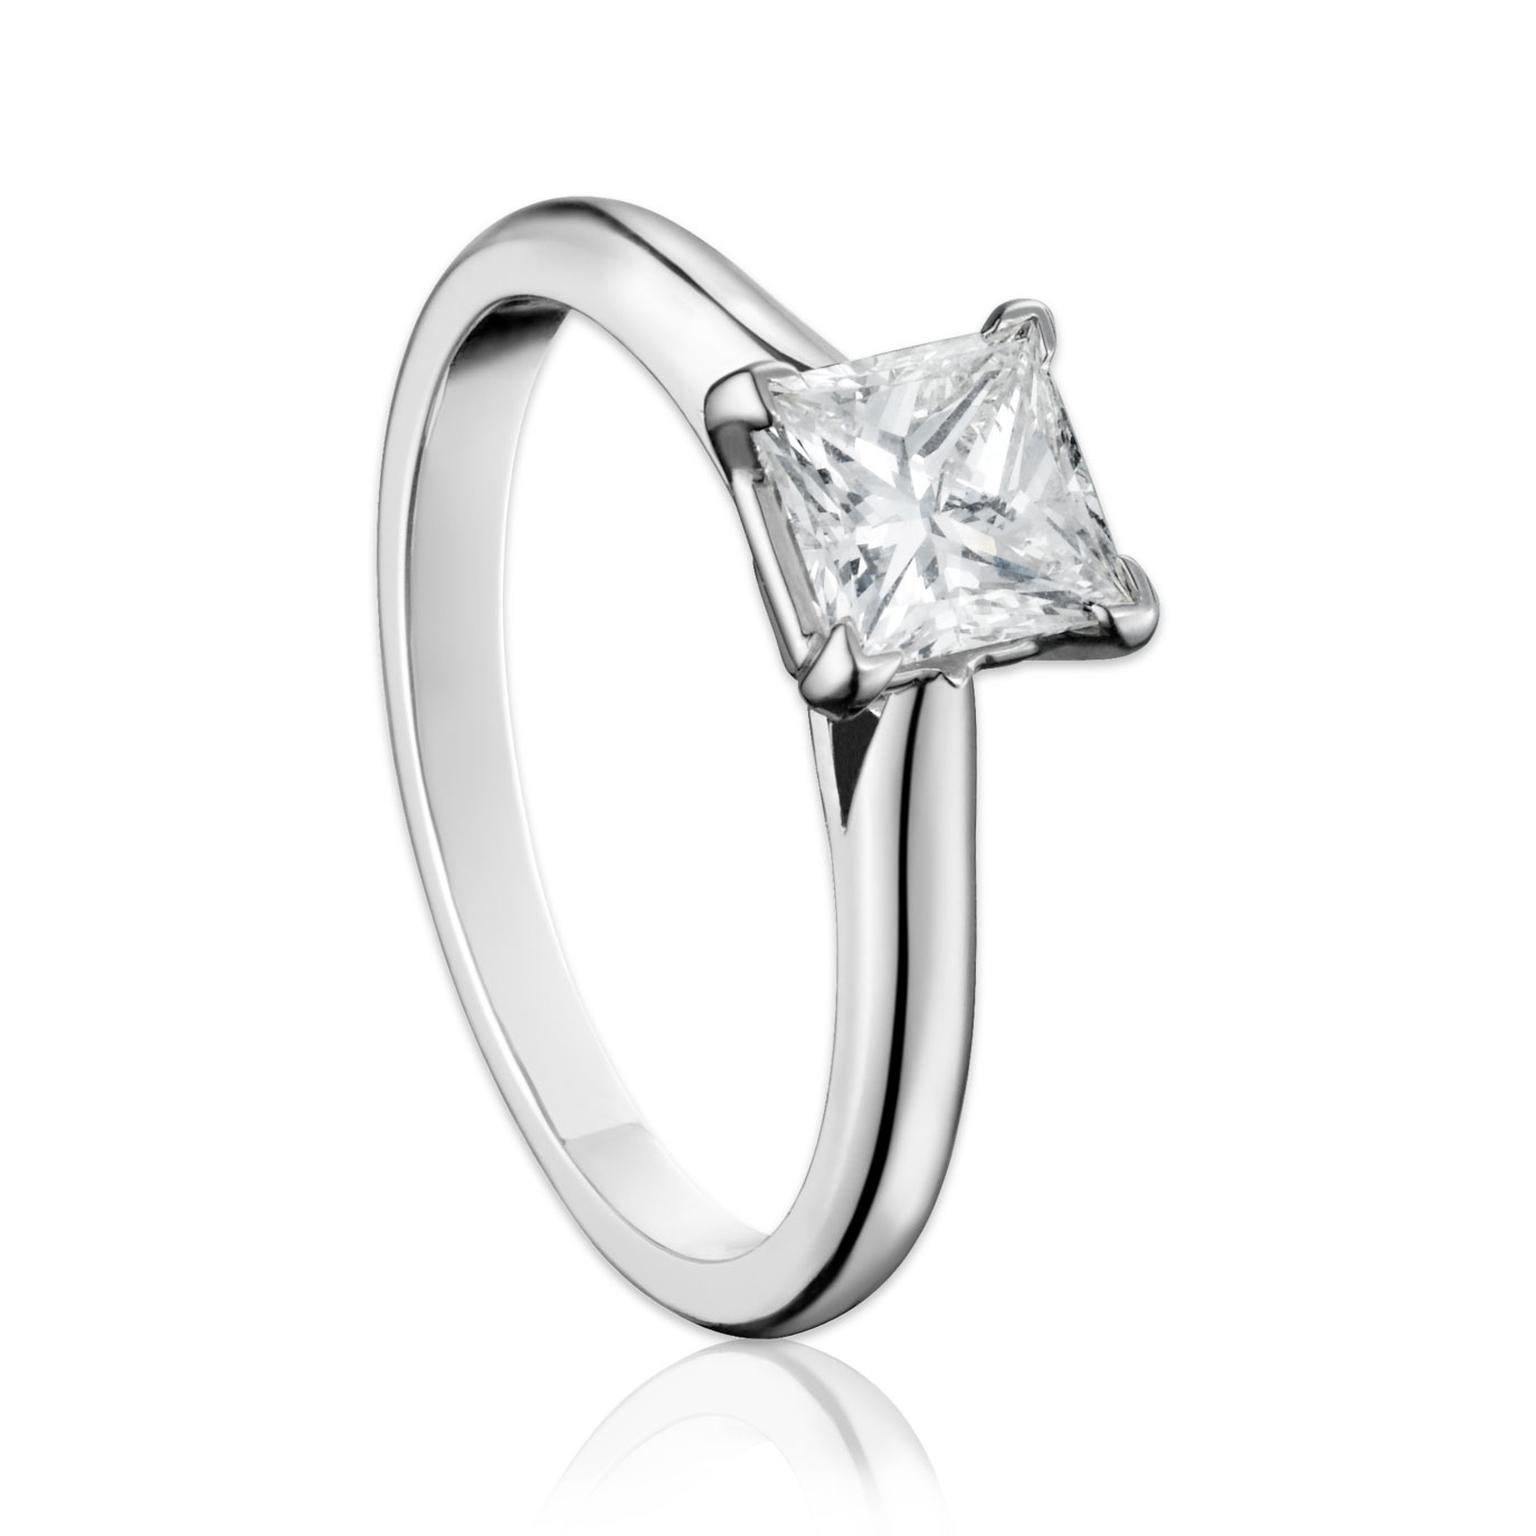 Cartier Solitaire 1895 princess-cut engagment ring in platinum